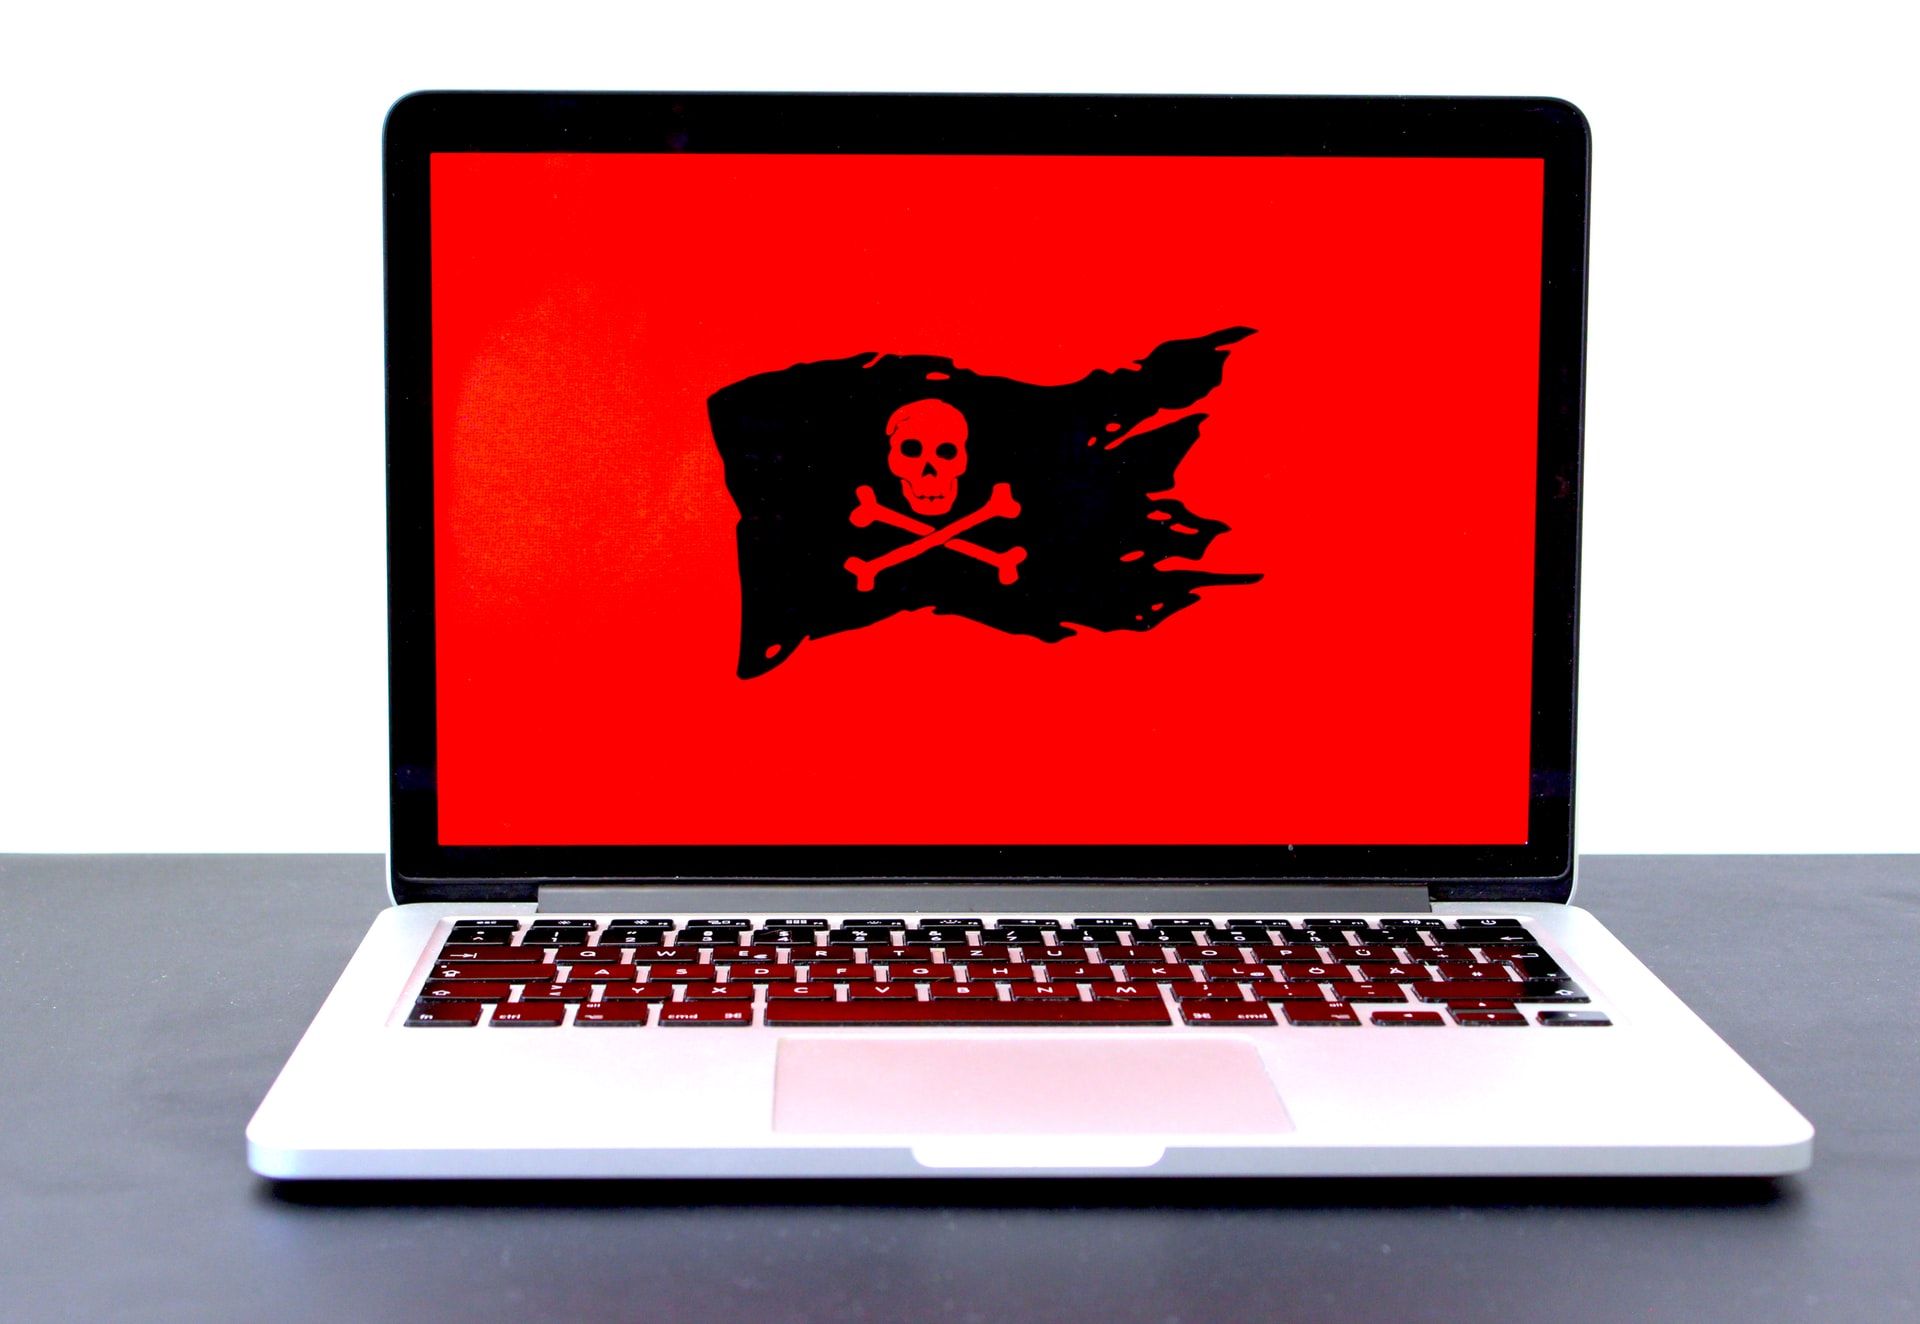 Laptop with a red screen and black pirate flag